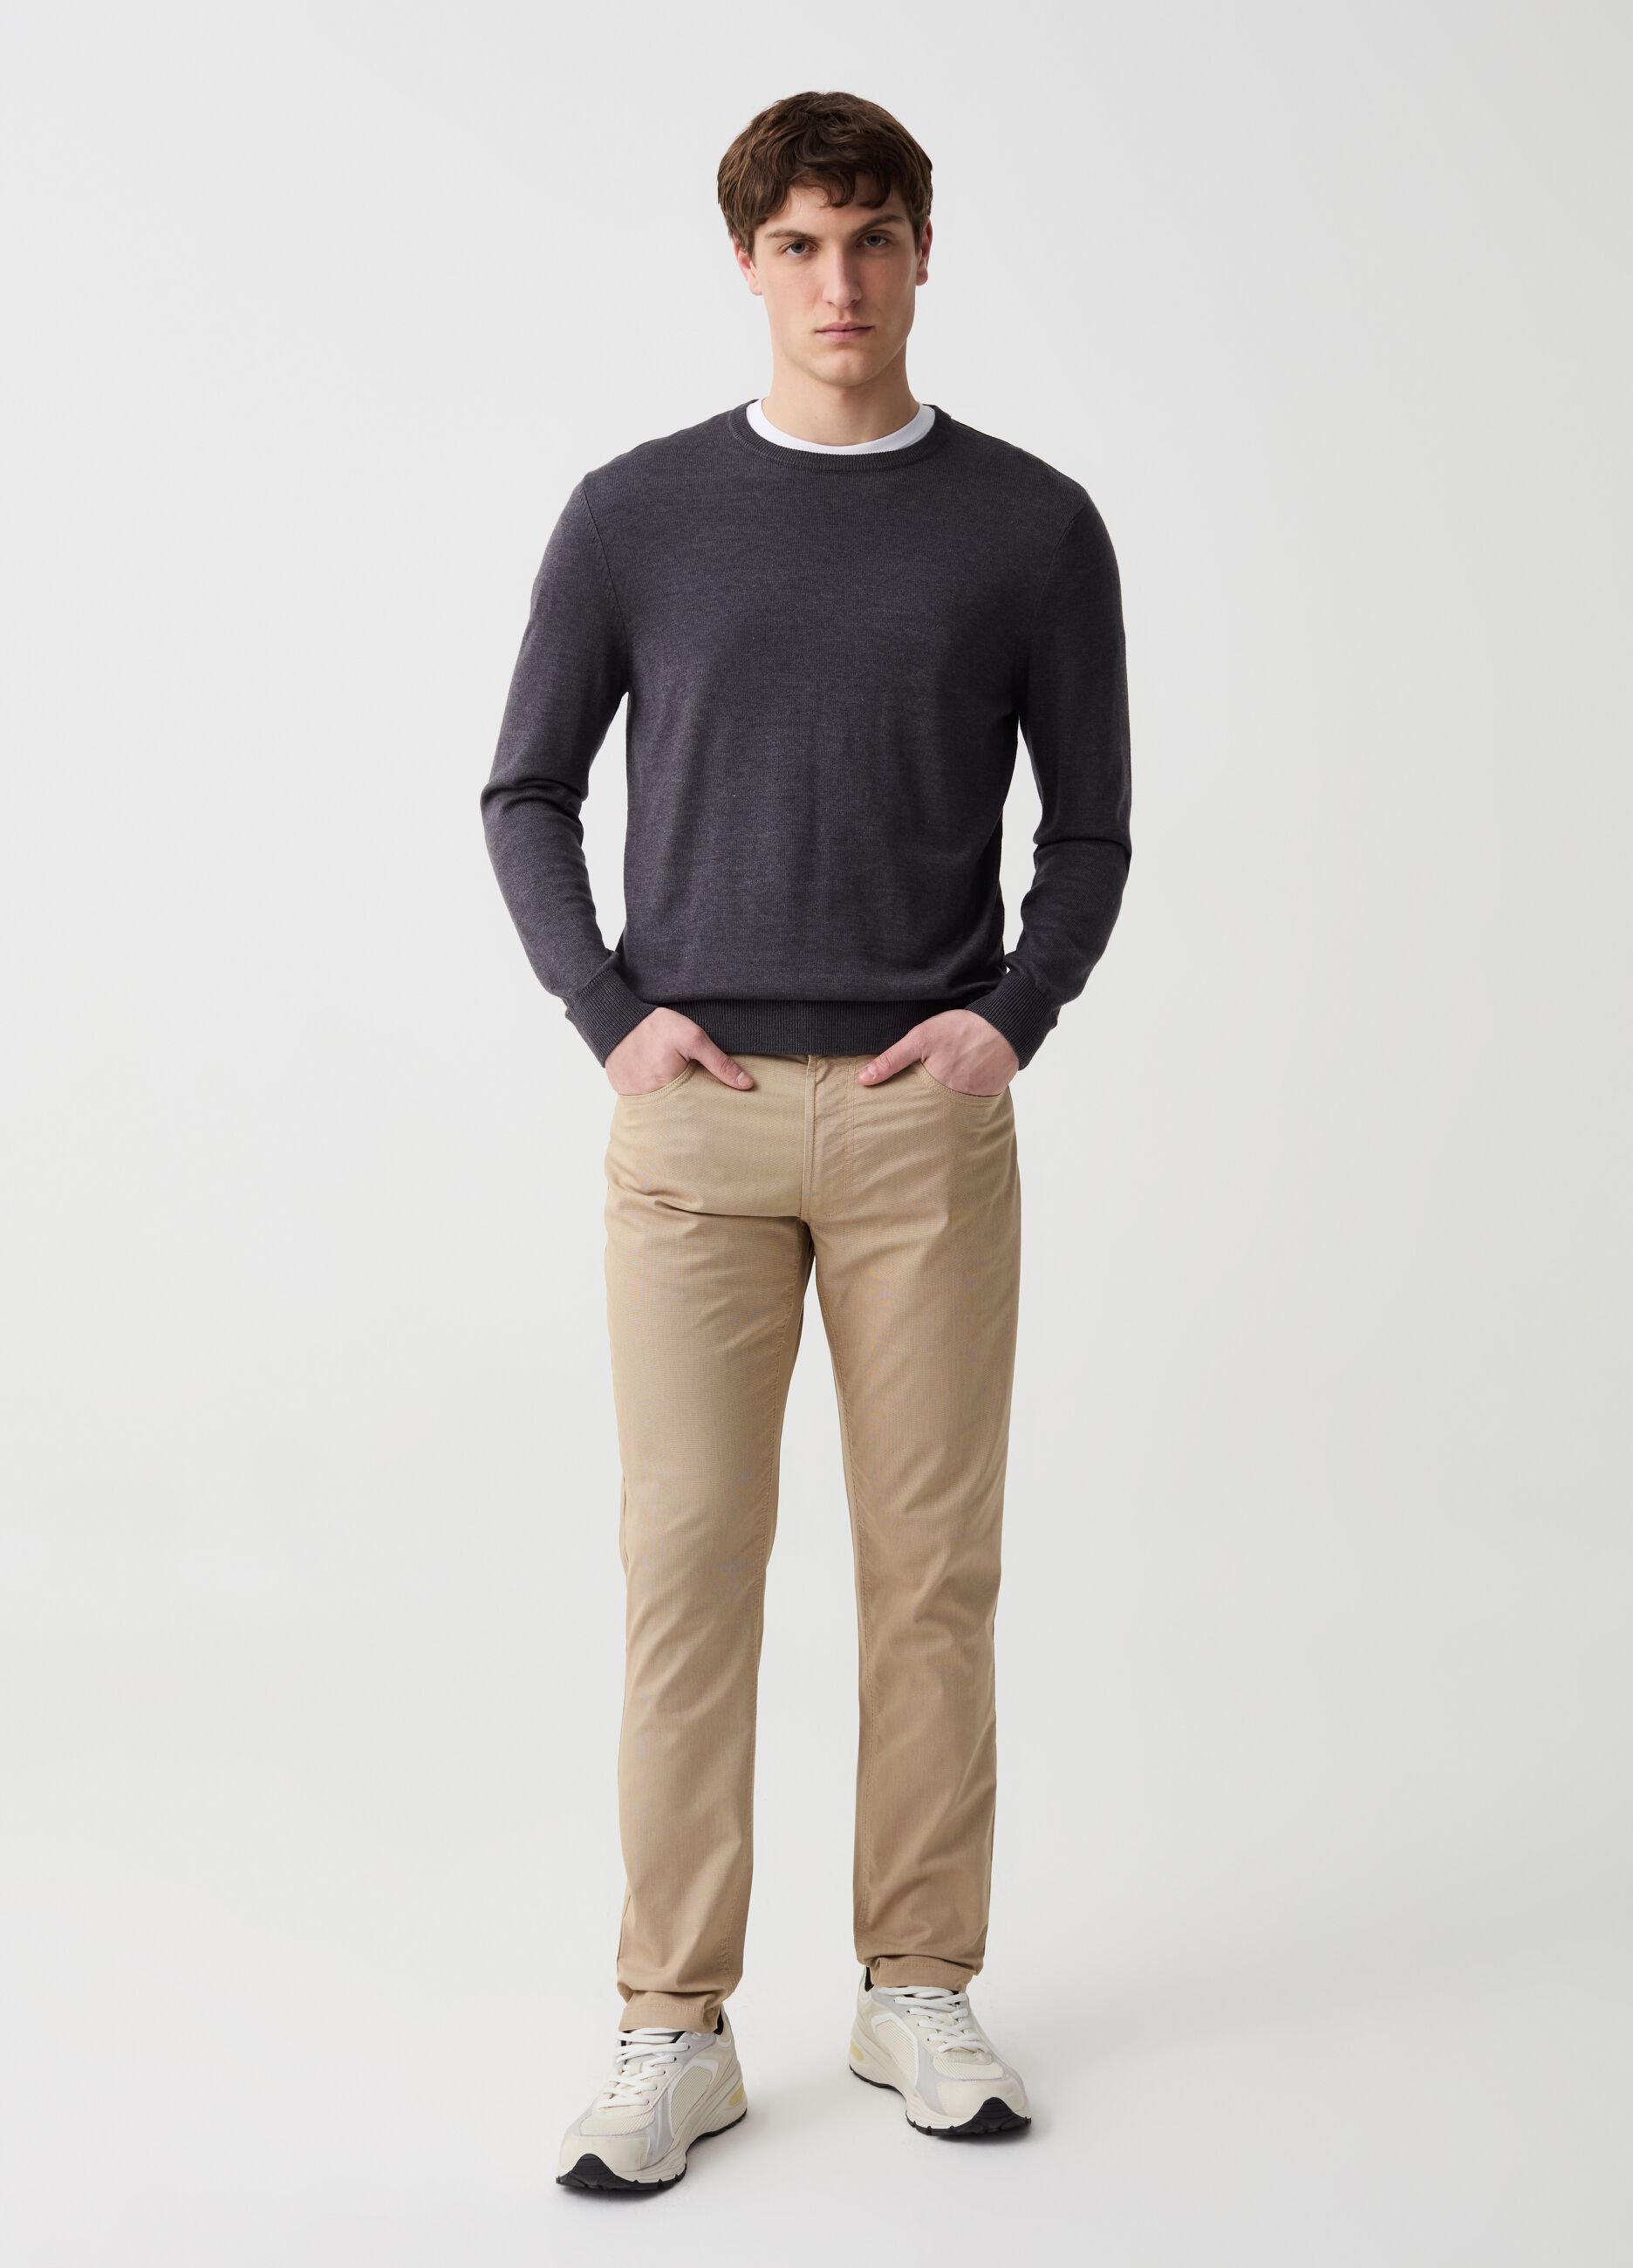 Five-pocket trousers with micro weave